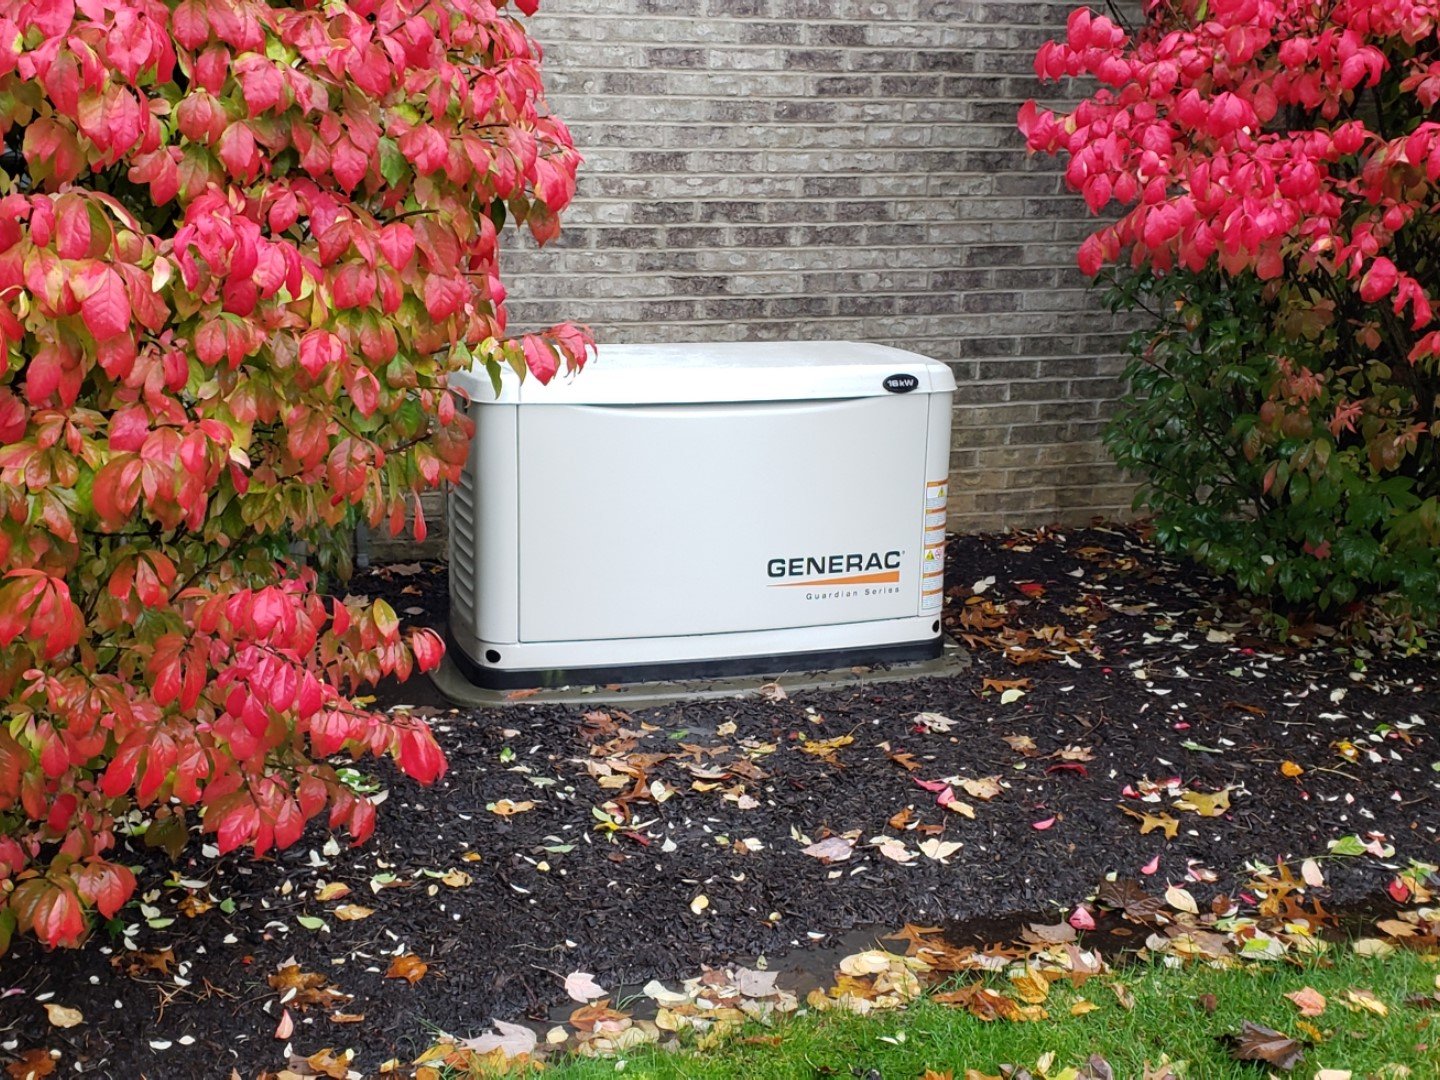 Generac Fall picture from Mike 4